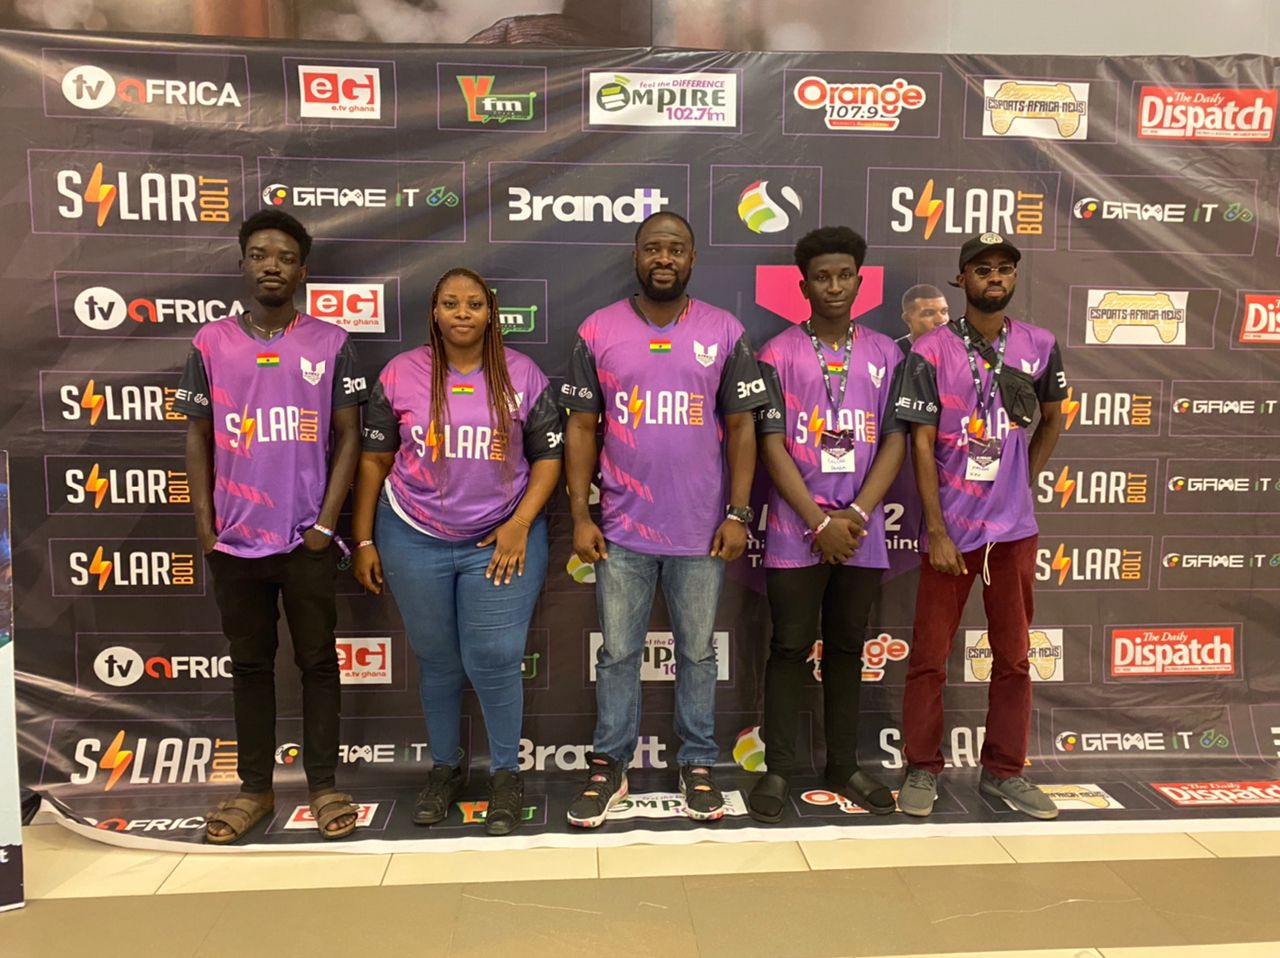 UPG FIFA22 Tournament: Team Xplosion conquers Accra; Falcon places 2nd in Qualifiers